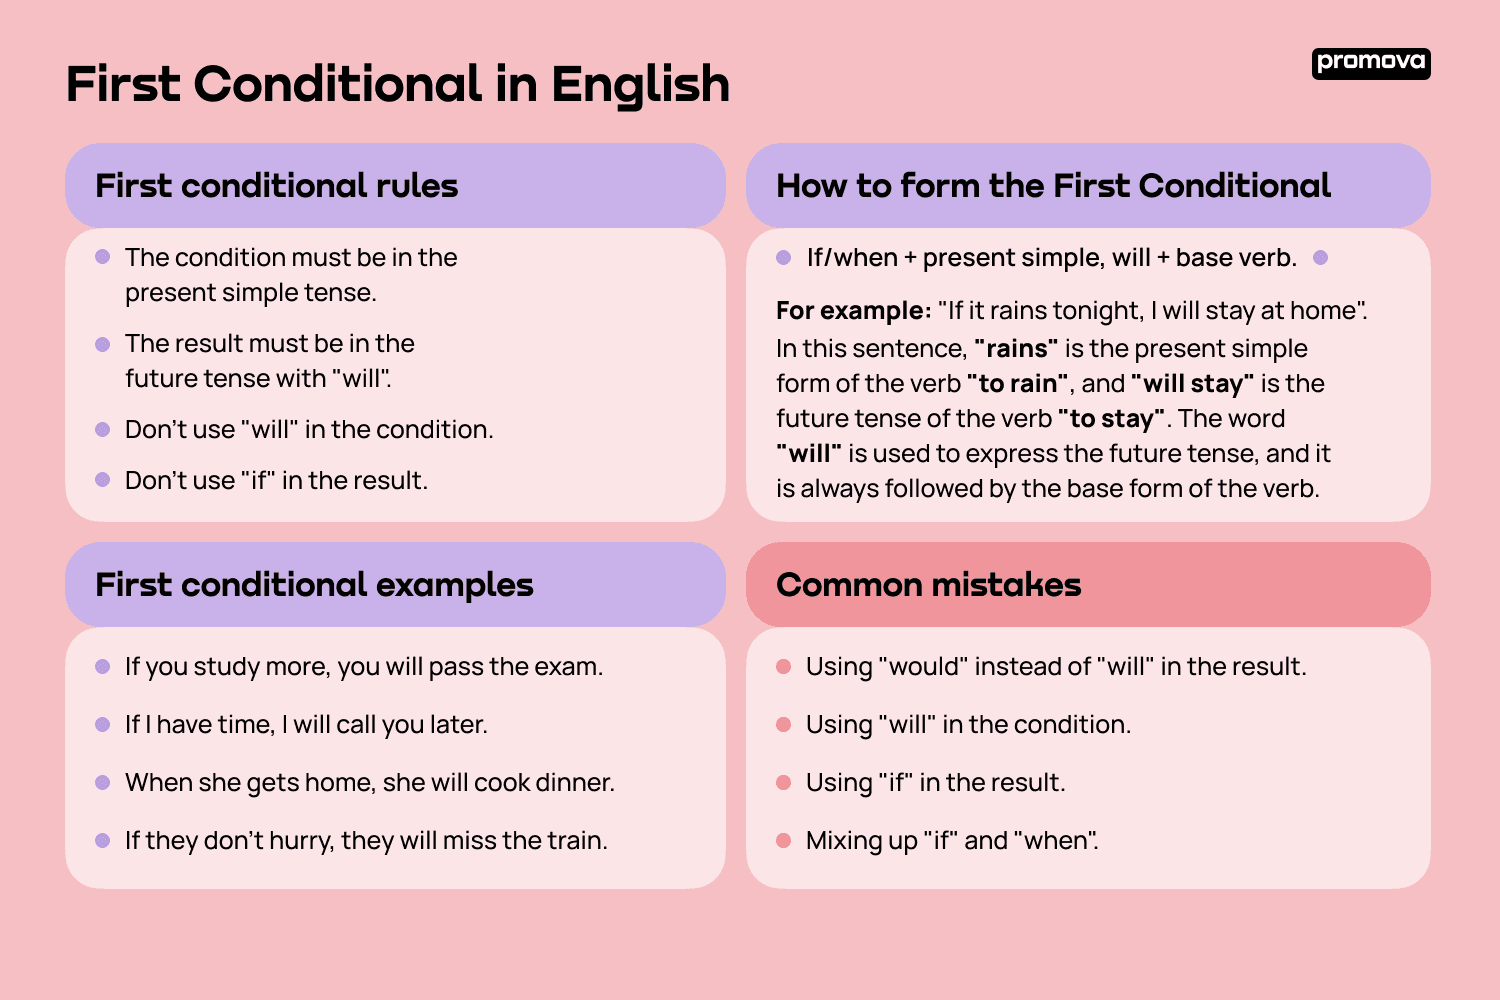 How to form the First Conditional